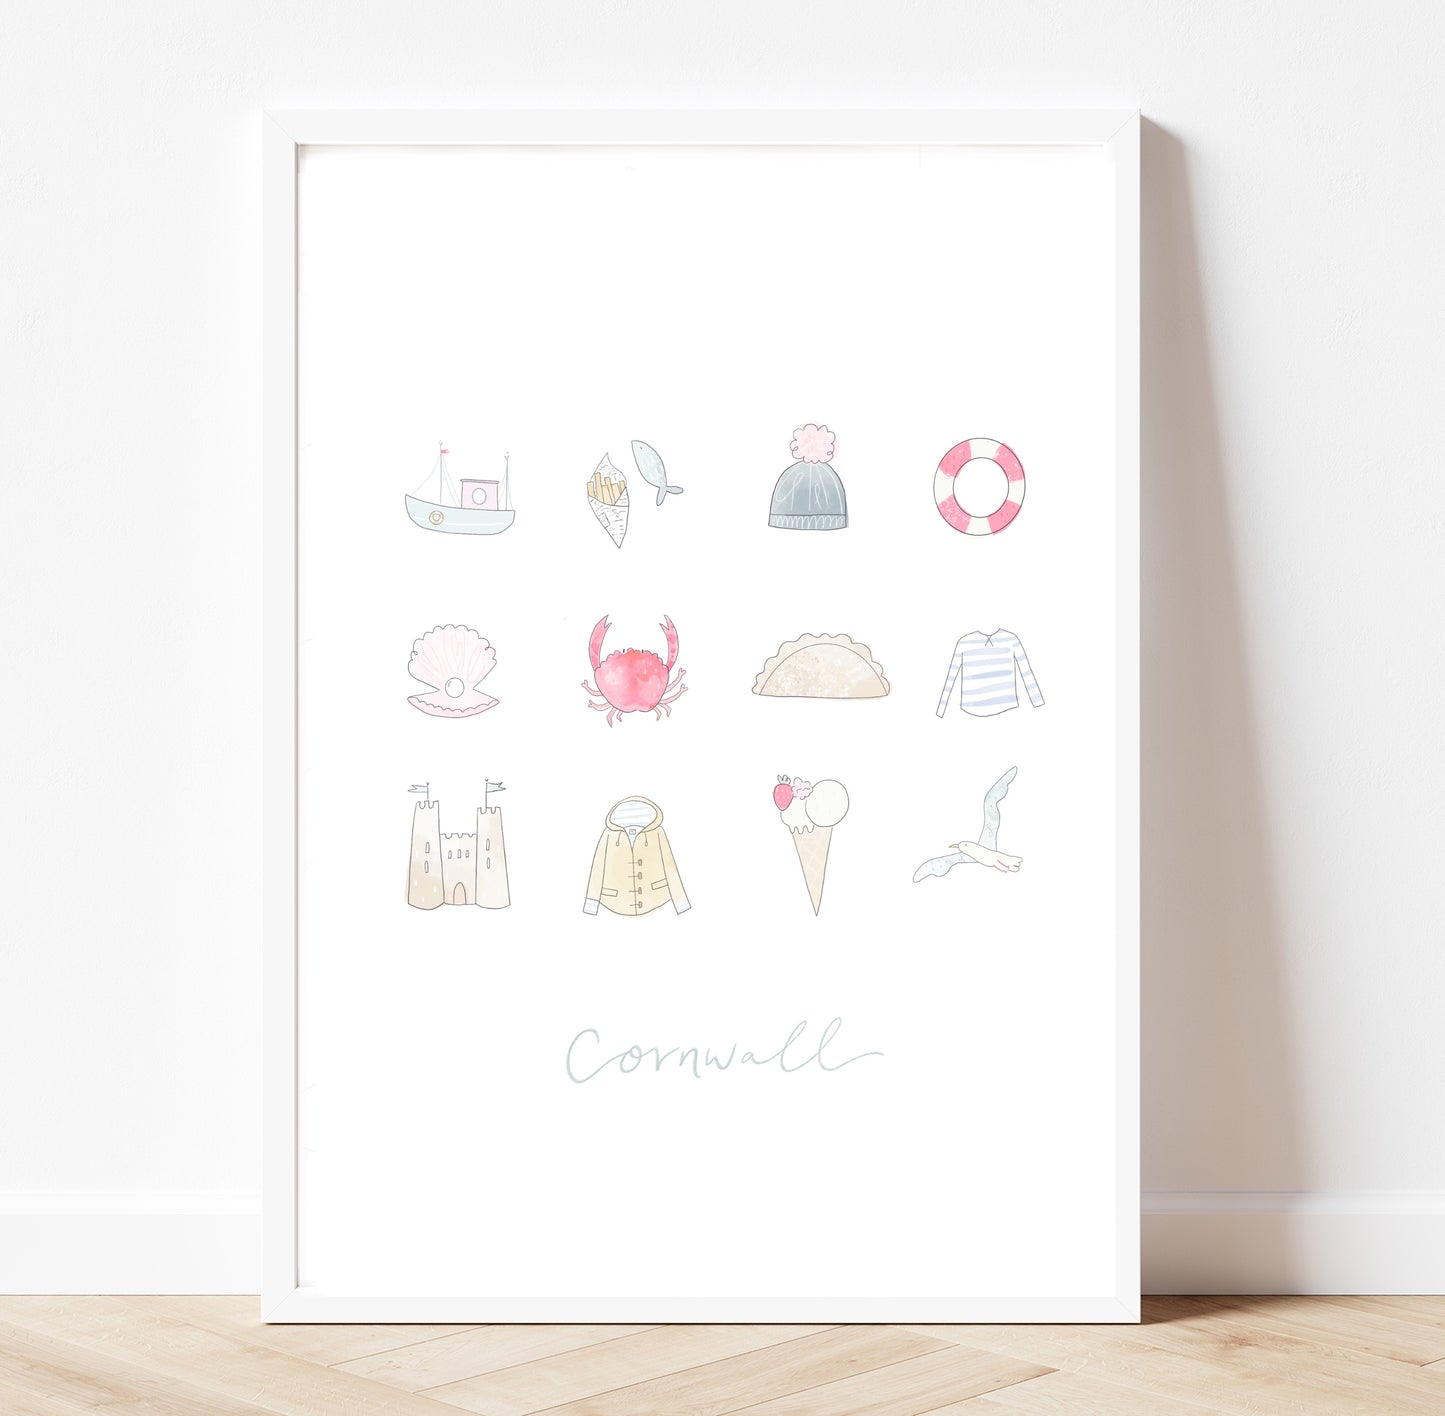 Cornwall - dreaming of the seaside pastel print - gold foil